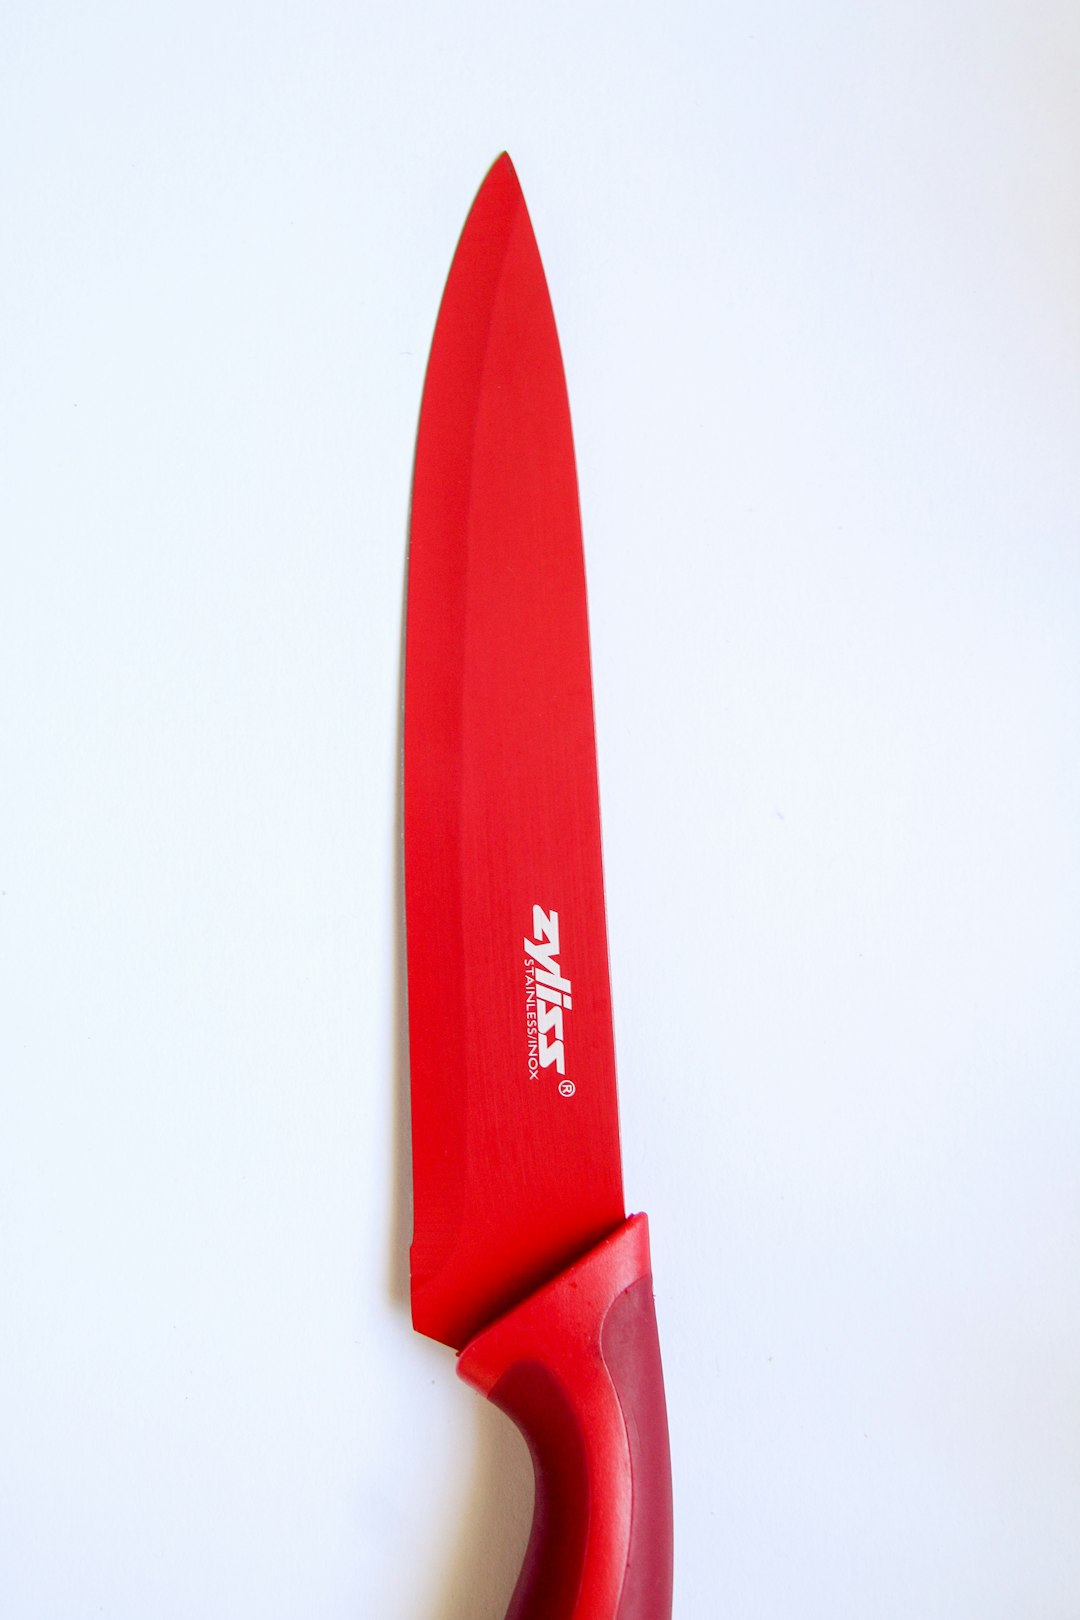 red and gray knife on white surface